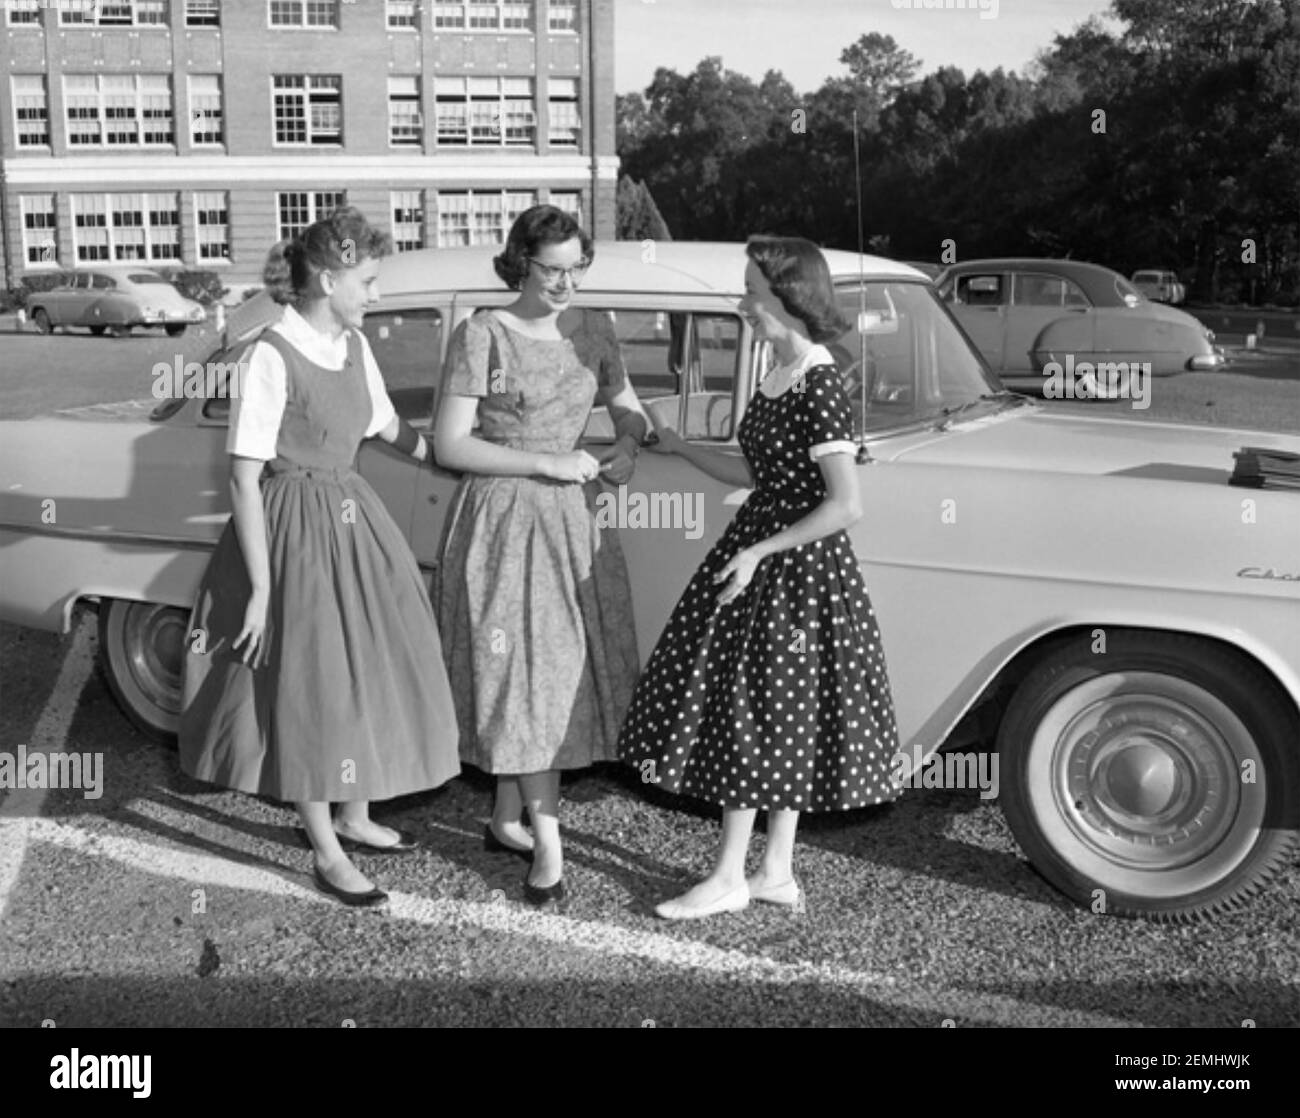 A,MERICAN TEENAGERS IN 1957 Stock Photo